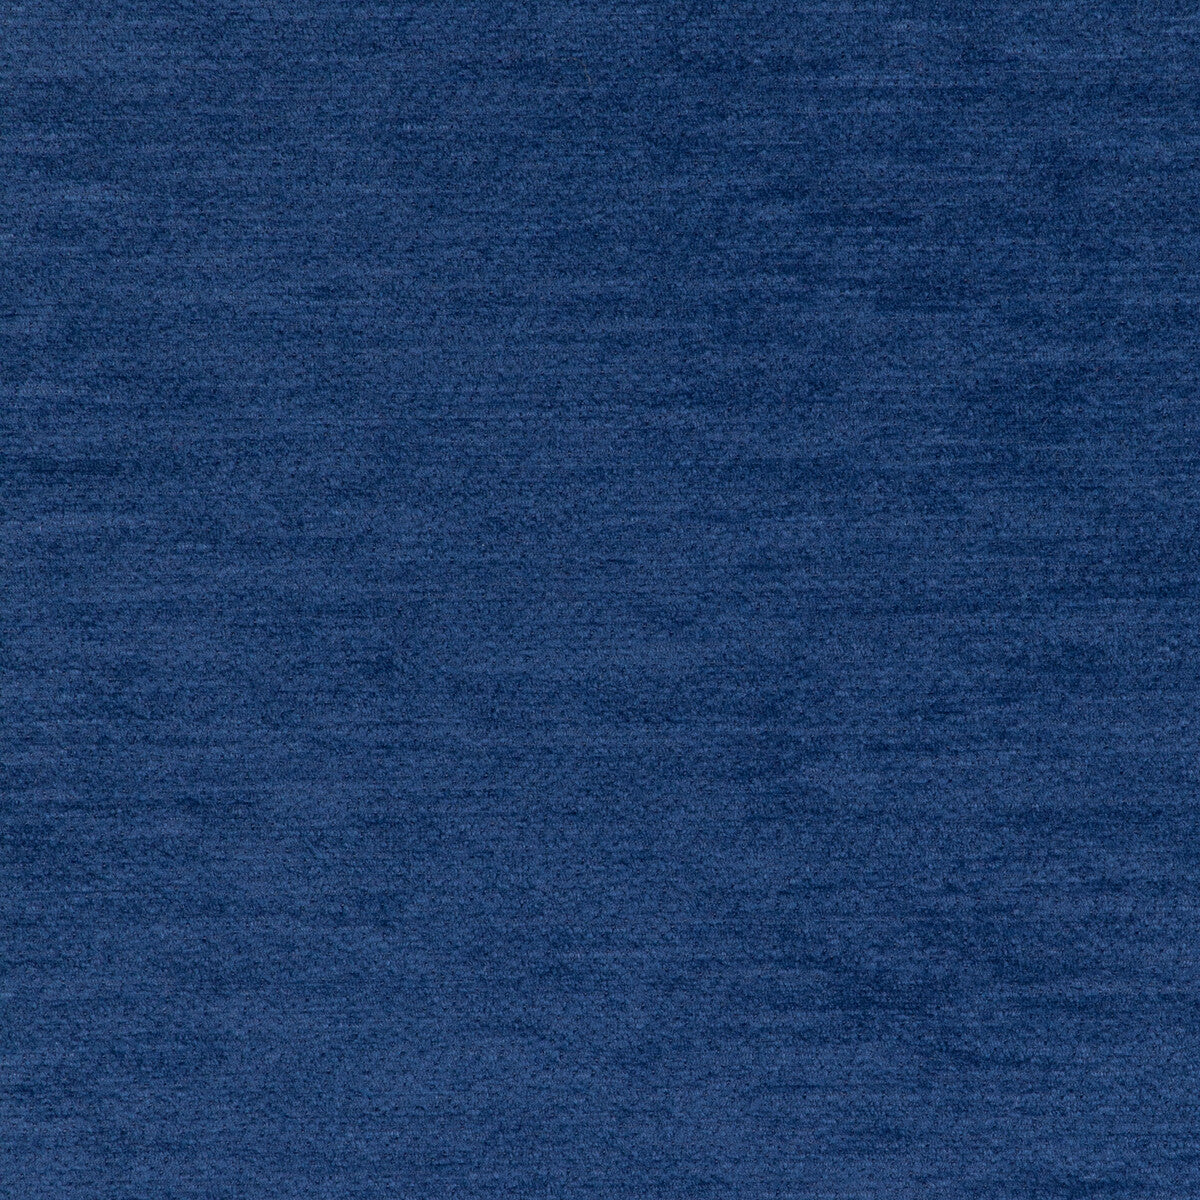 Surfside Chenille fabric in marine color - pattern 36938.50.0 - by Kravet Couture in the Riviera collection